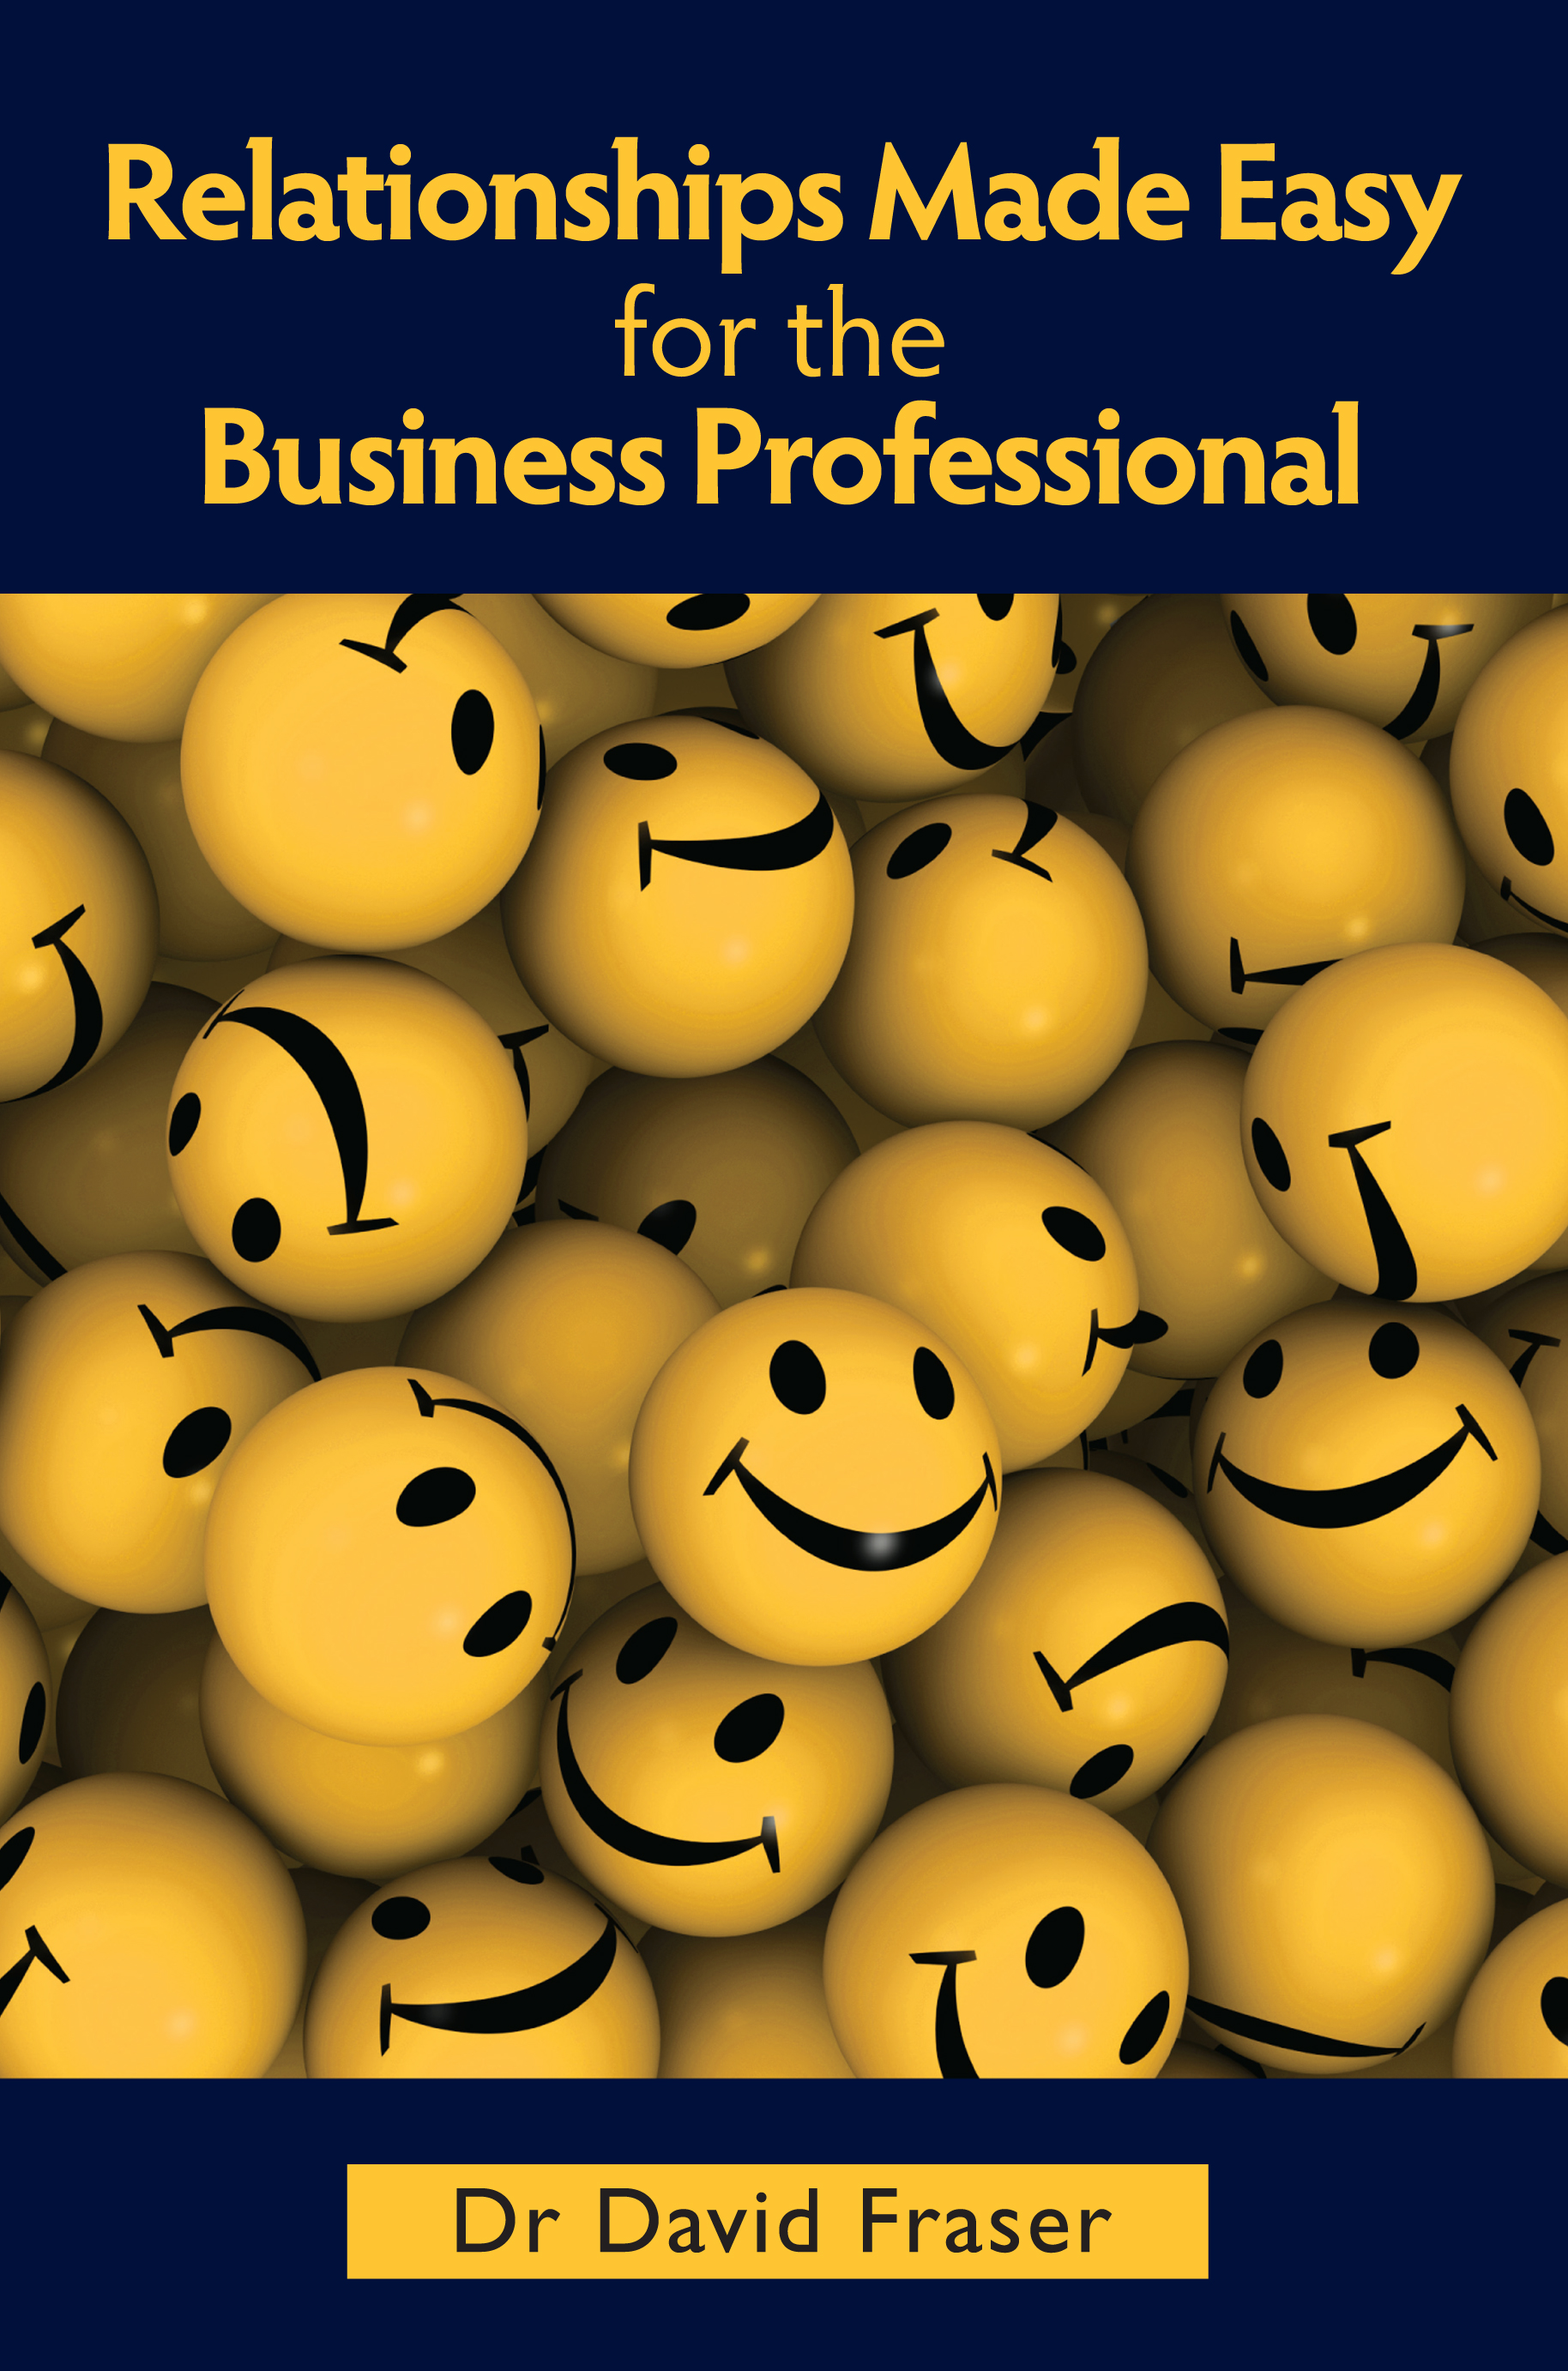 Relationships Made Easy for the Business Professional